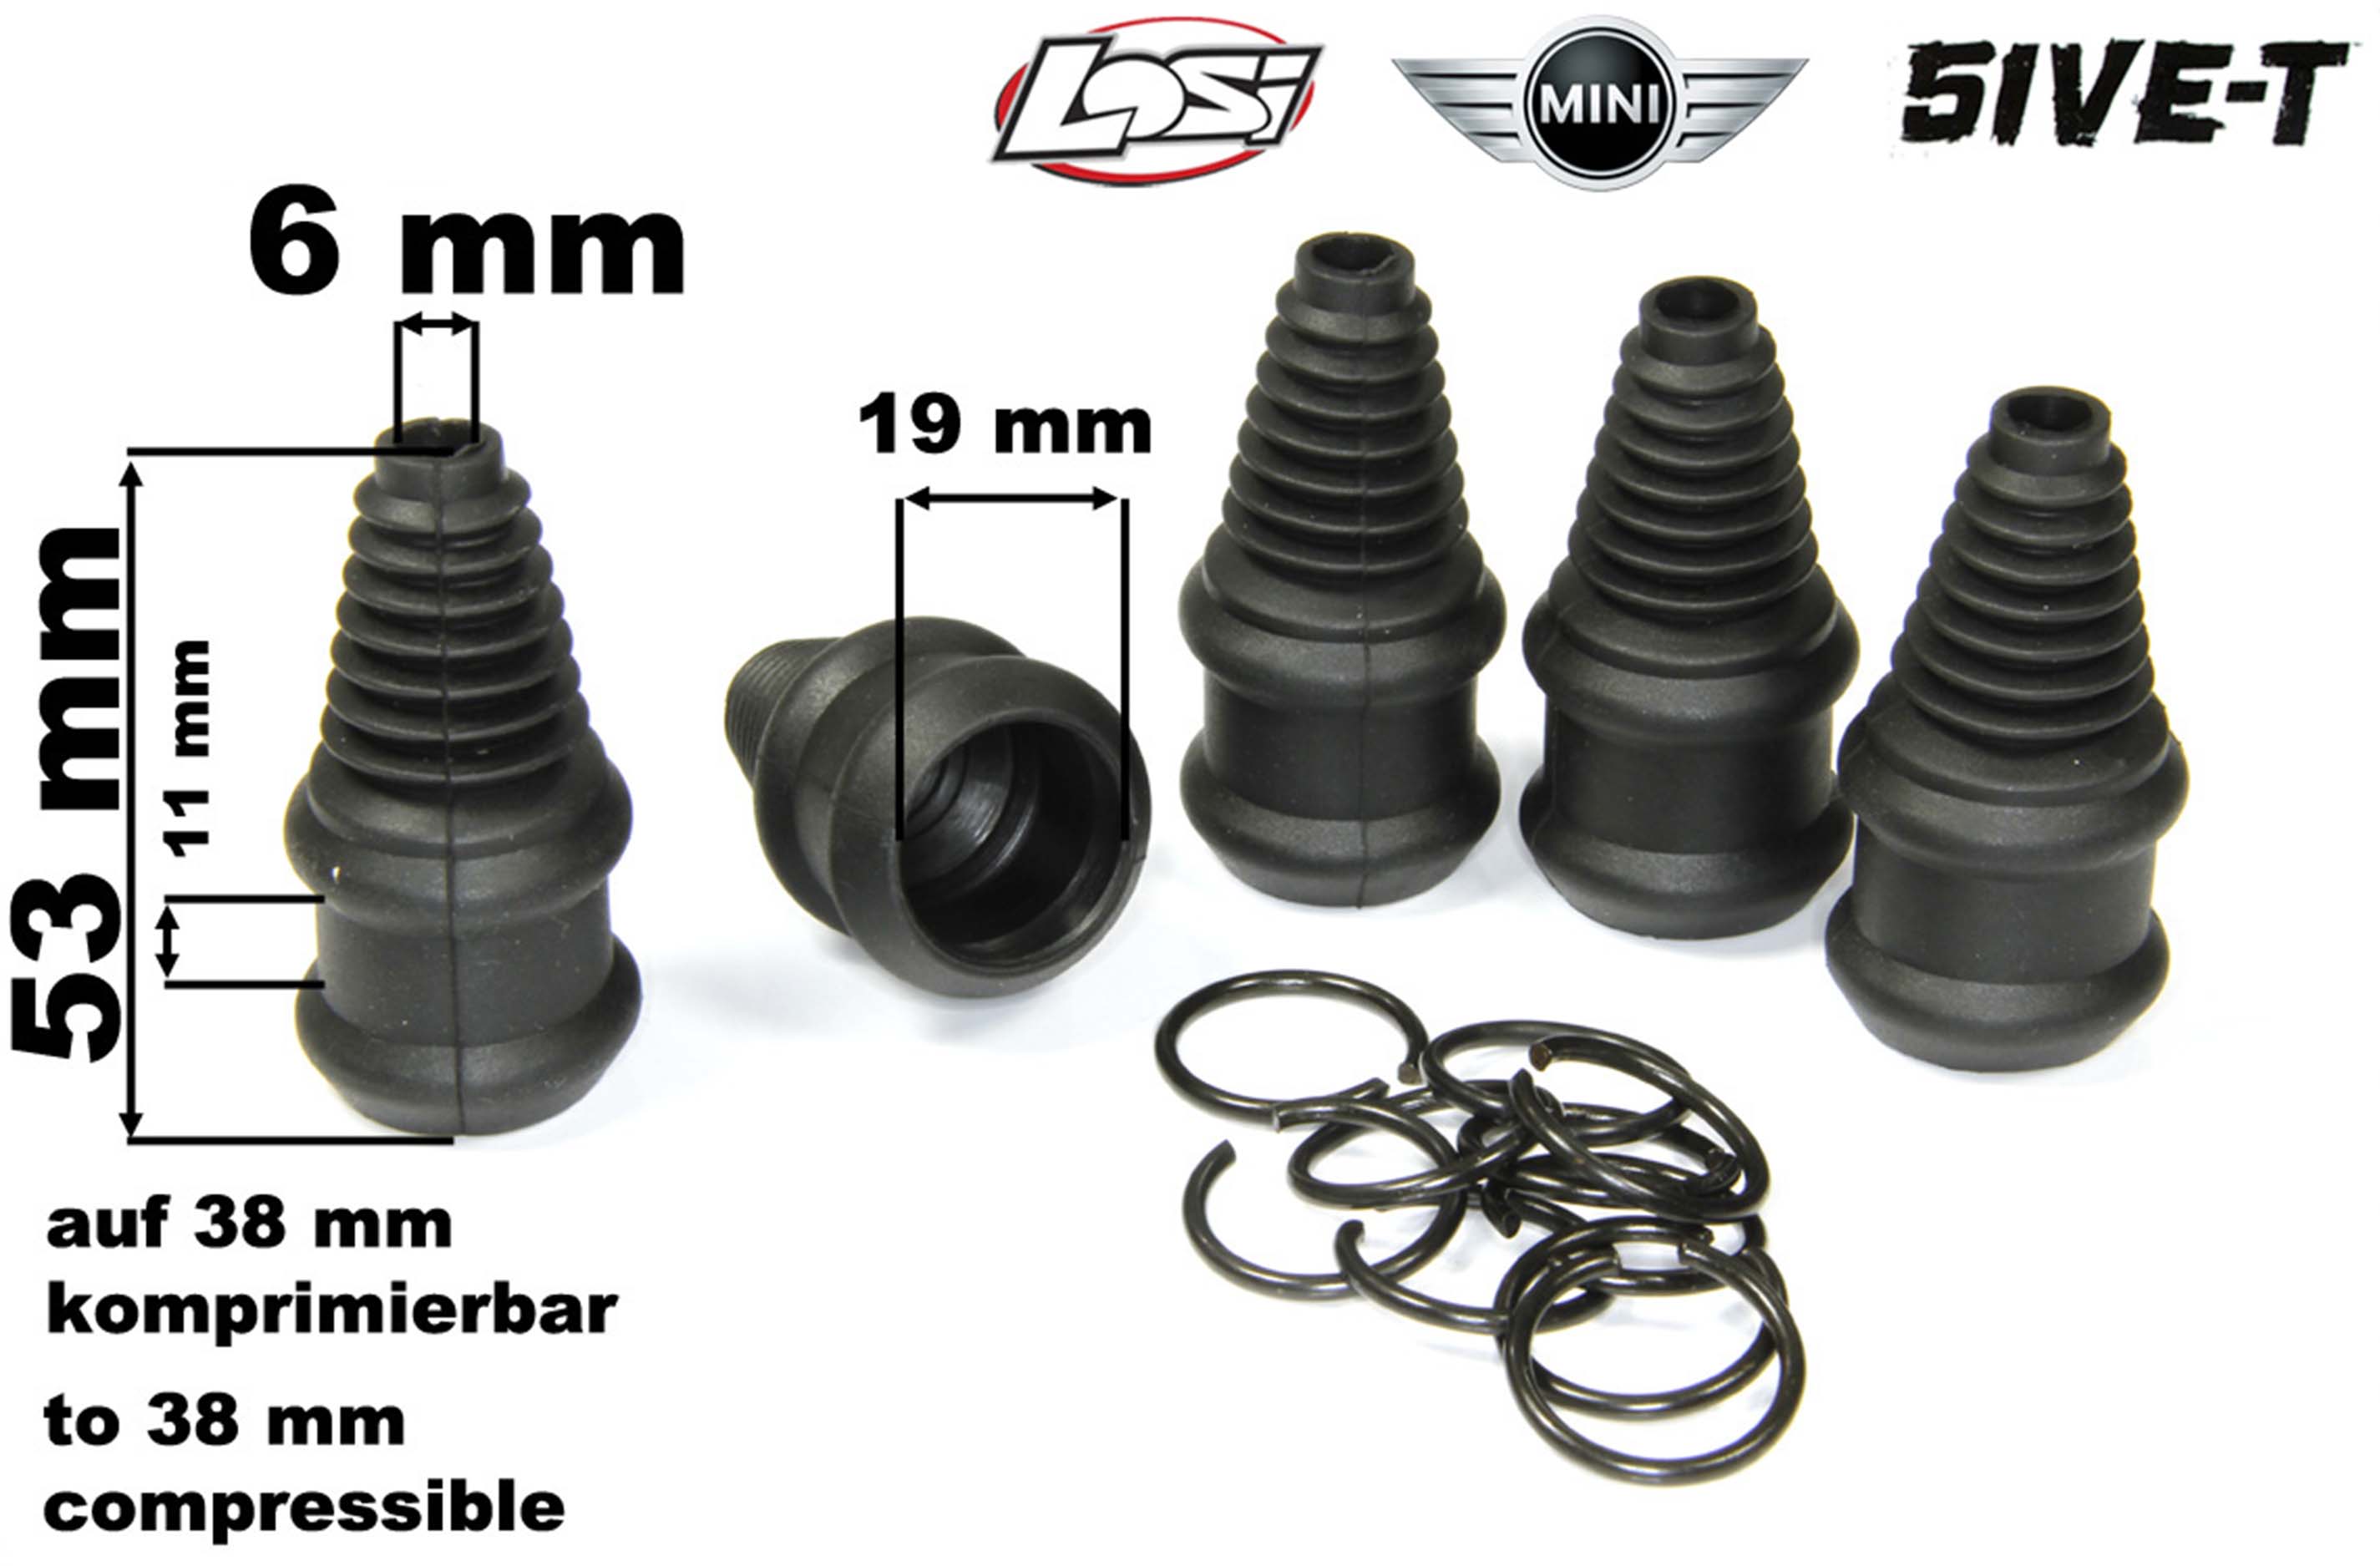 LOSB3222/01 Losi Center Coupler Boots and Clips for 5ive-T